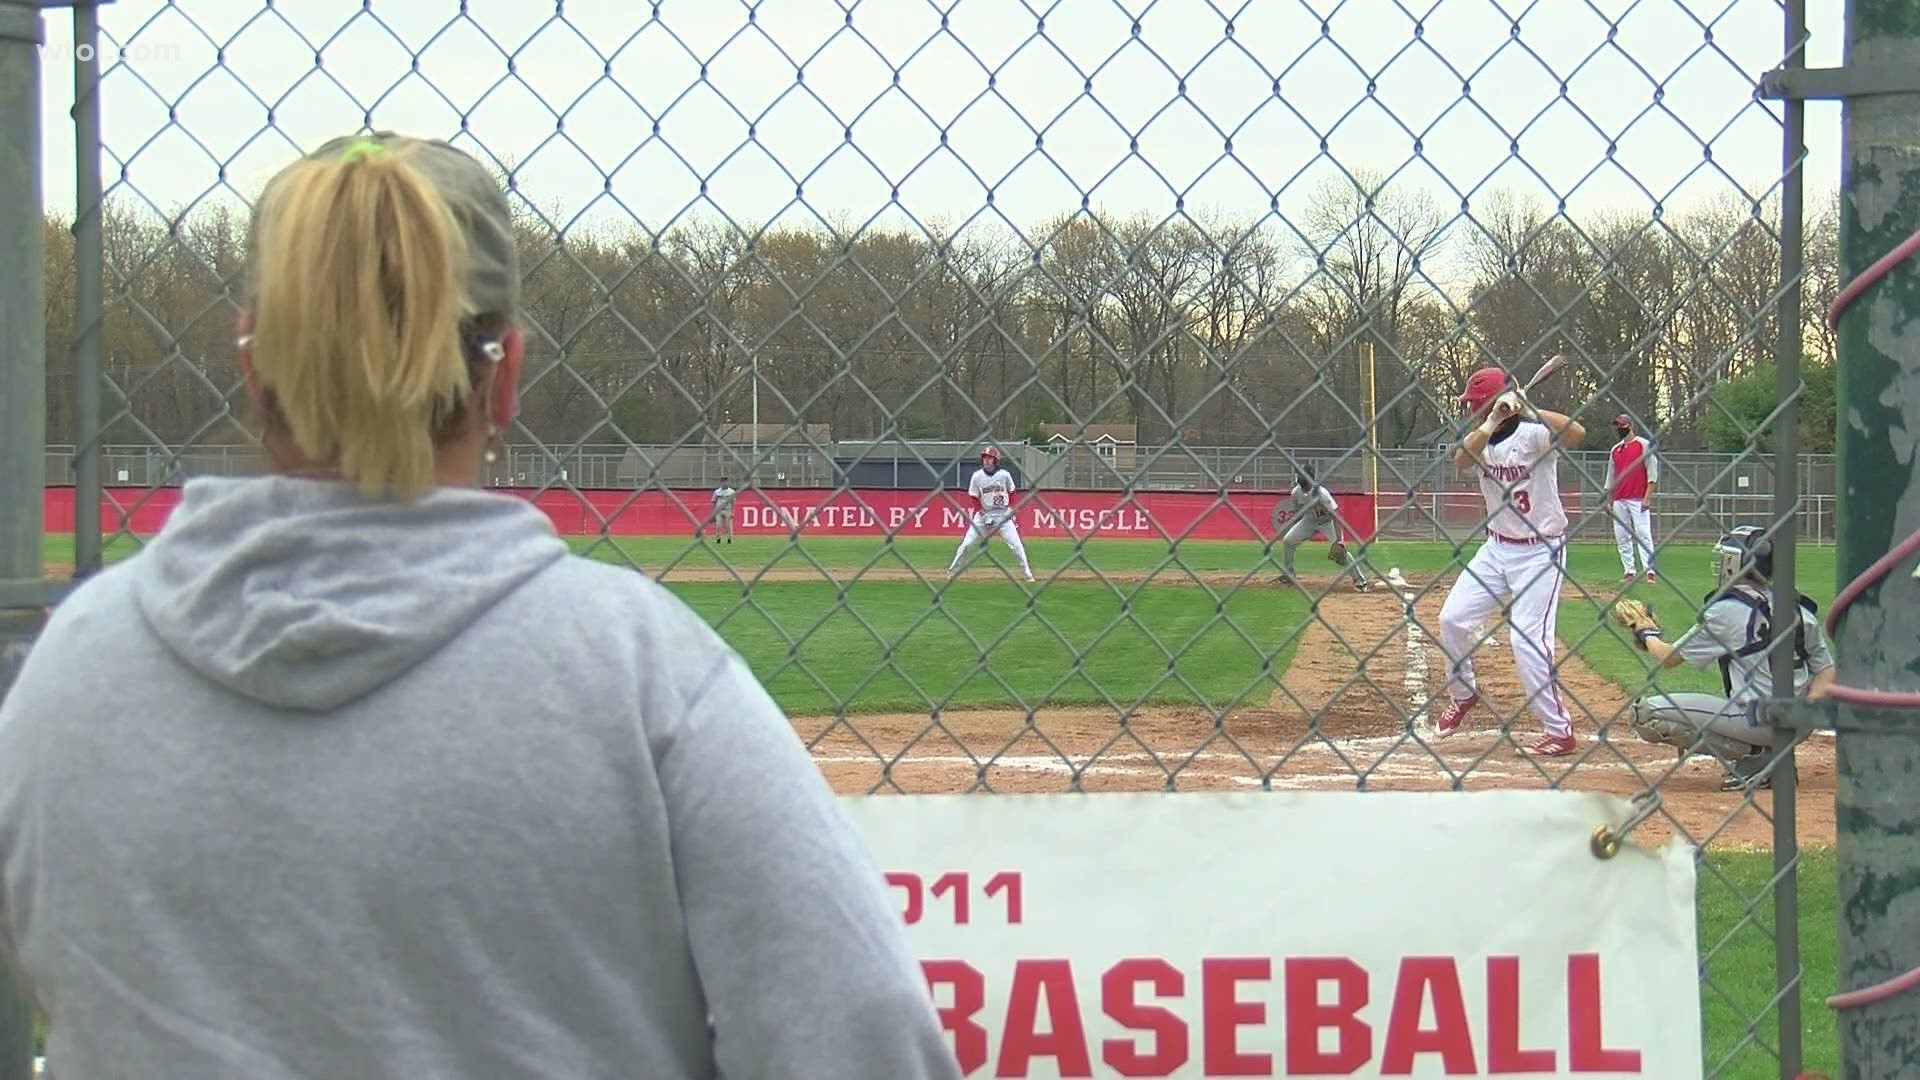 Michigan Gov. Whitmer suggested, not mandated, a two-week pause in sports as cases in the state climb. In Bedford, baseball continues with precautions and protocols.